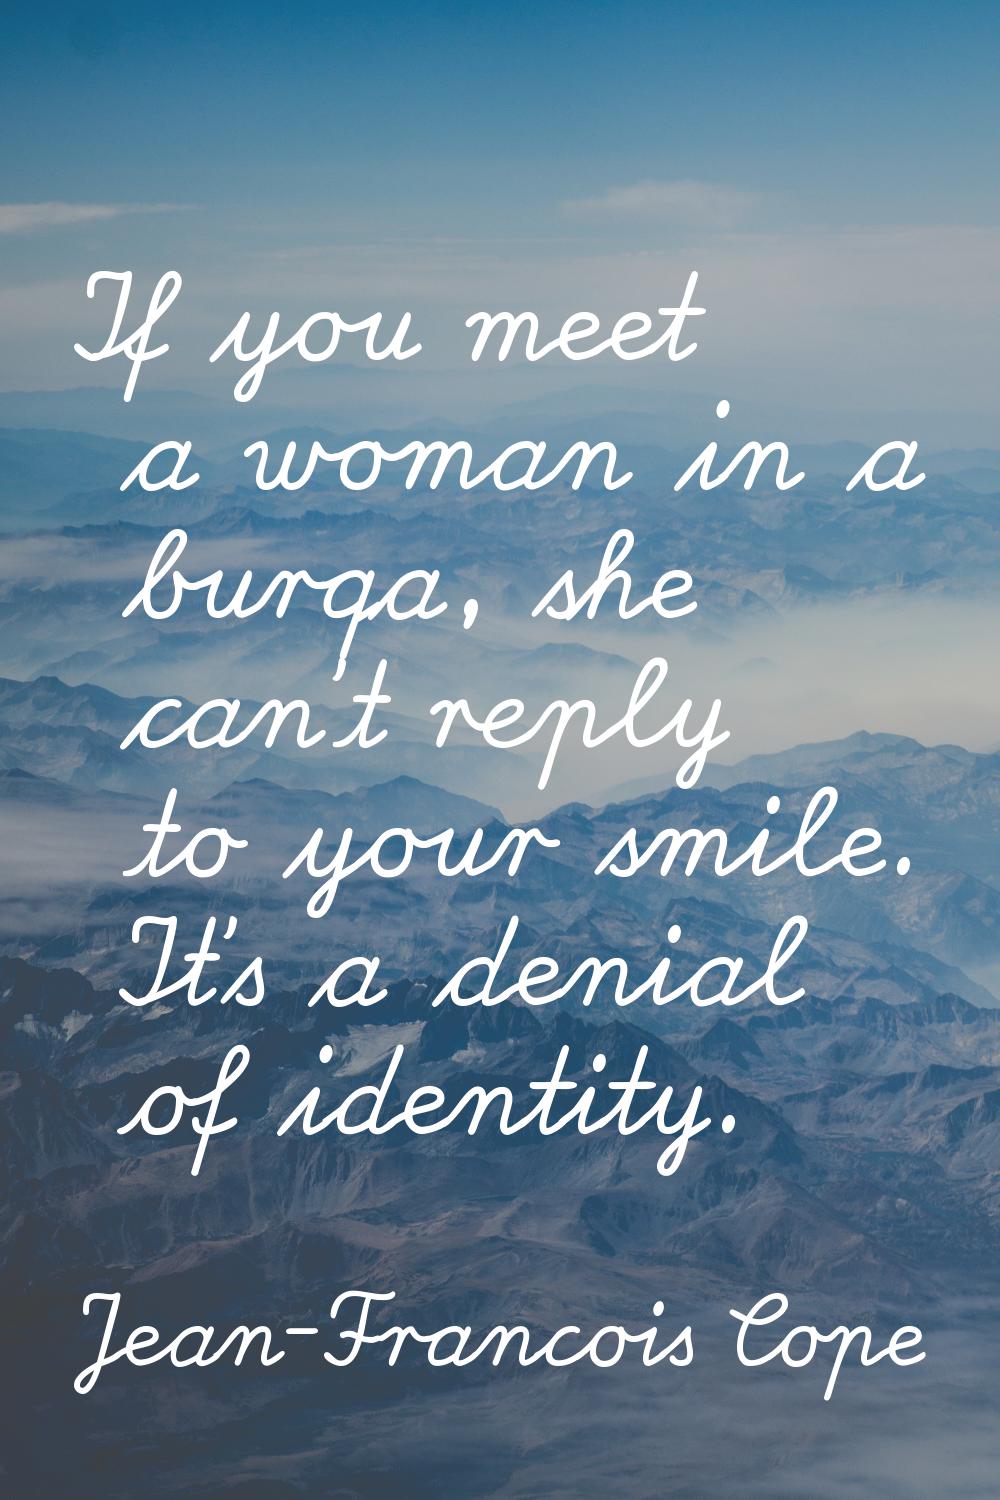 If you meet a woman in a burqa, she can't reply to your smile. It's a denial of identity.